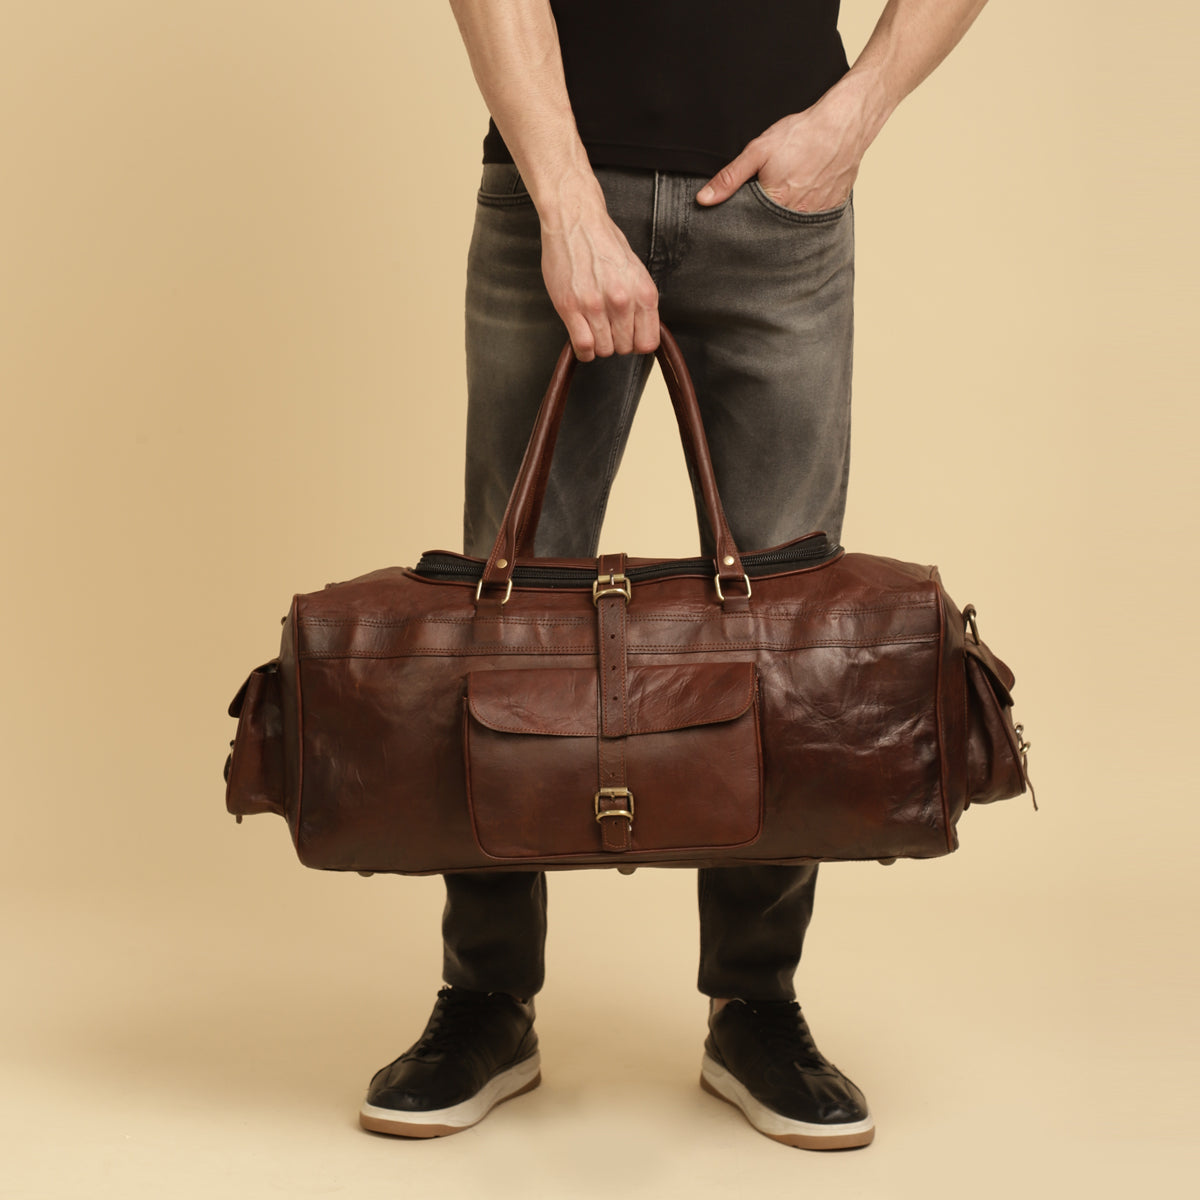 Model with red  leather duffle bag 